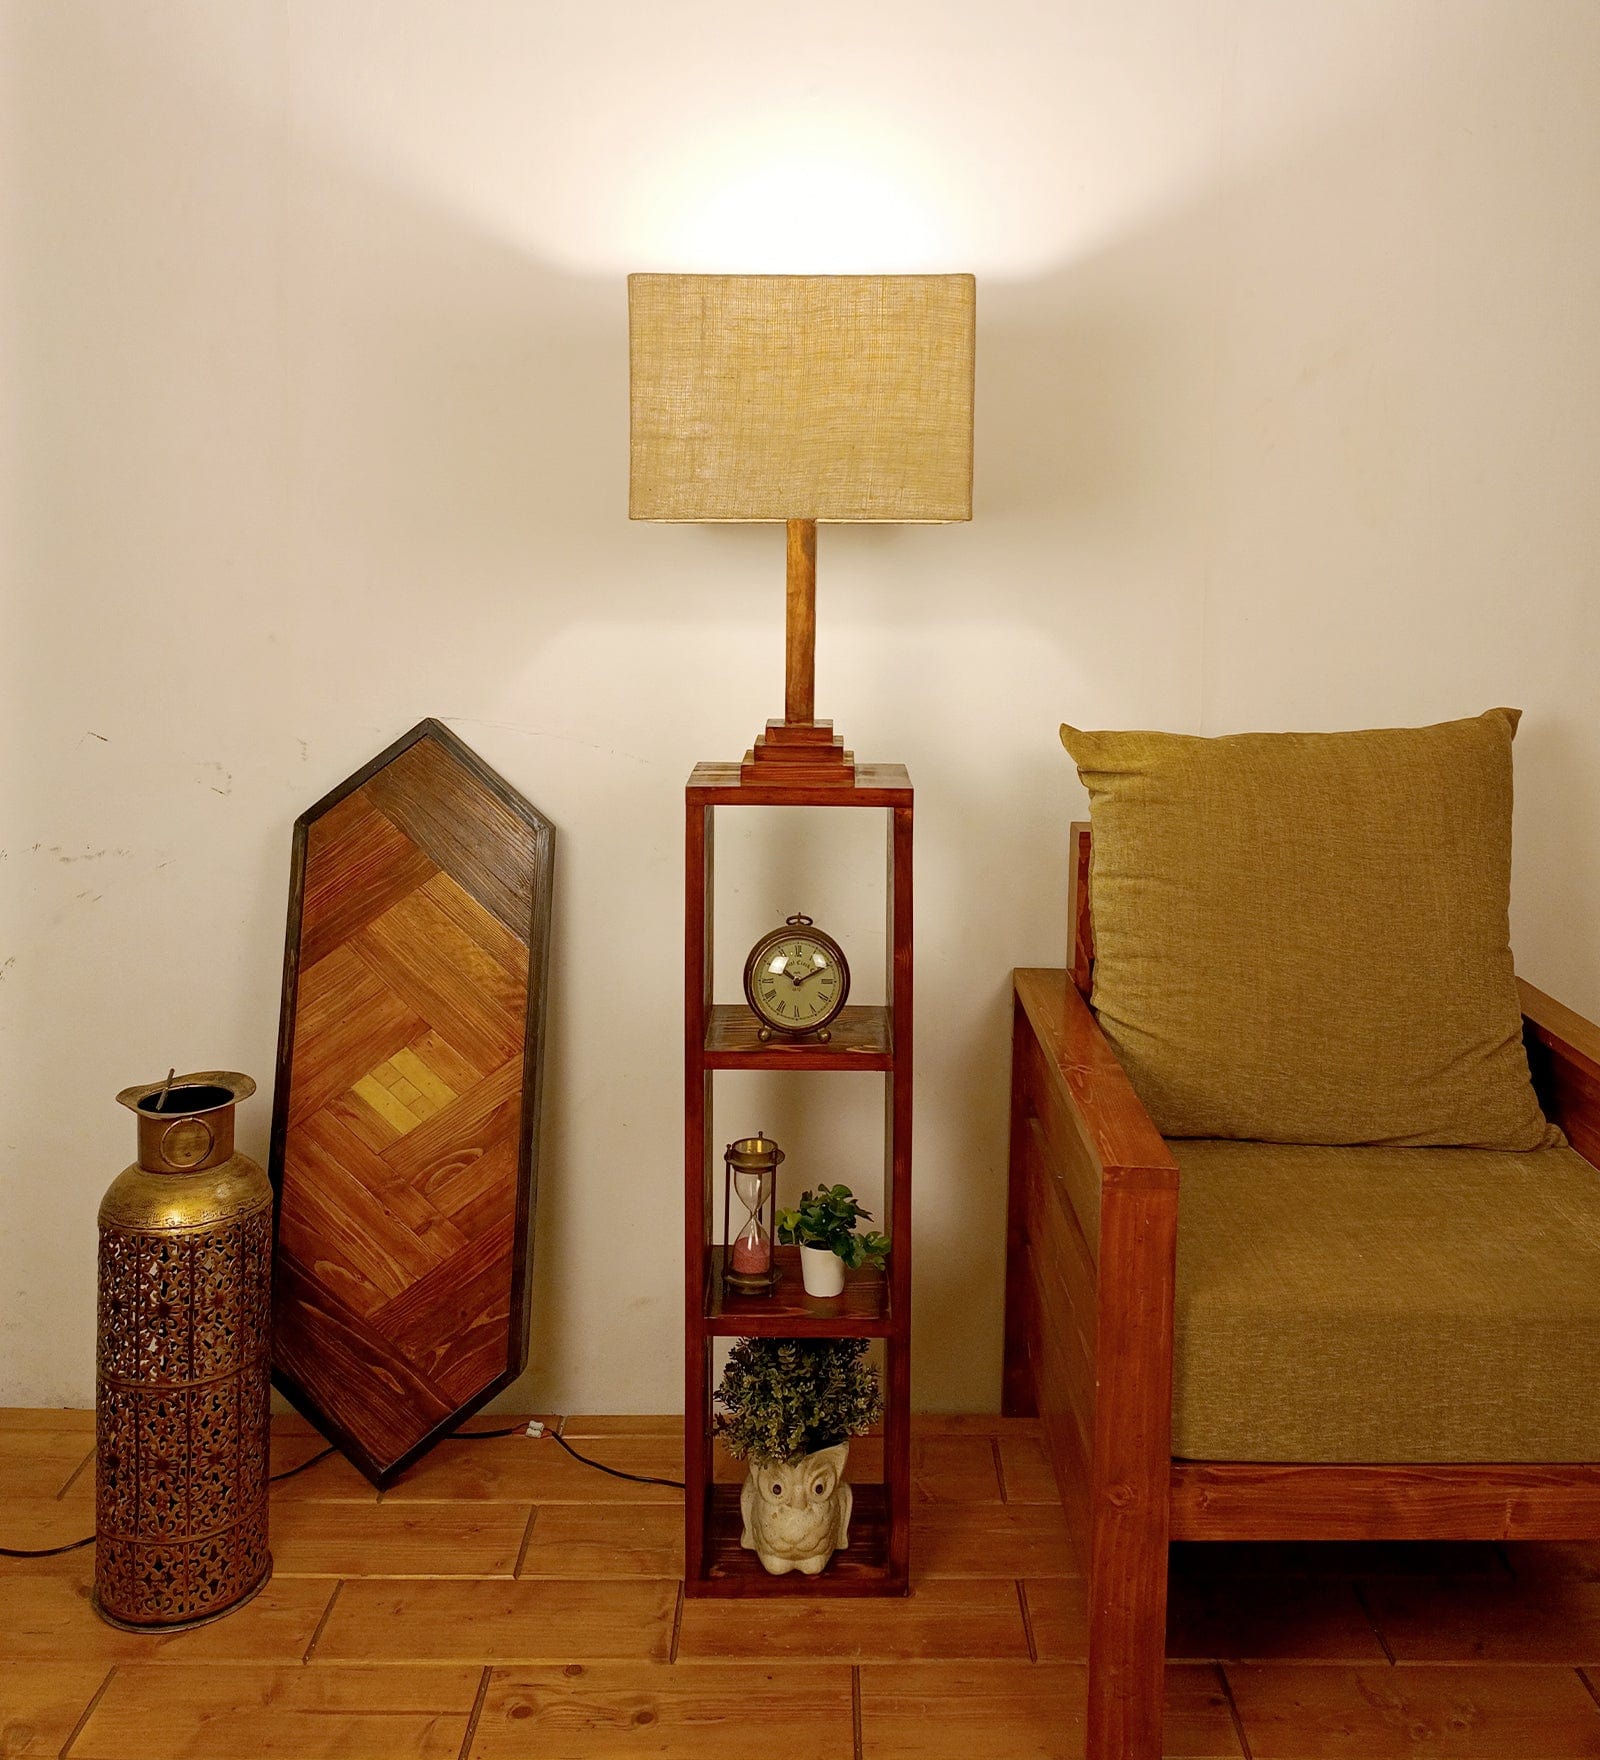 Ebenezer Wooden Floor Lamp with Brown Base and Beige Fabric Lampshade (BULB NOT INCLUDED)